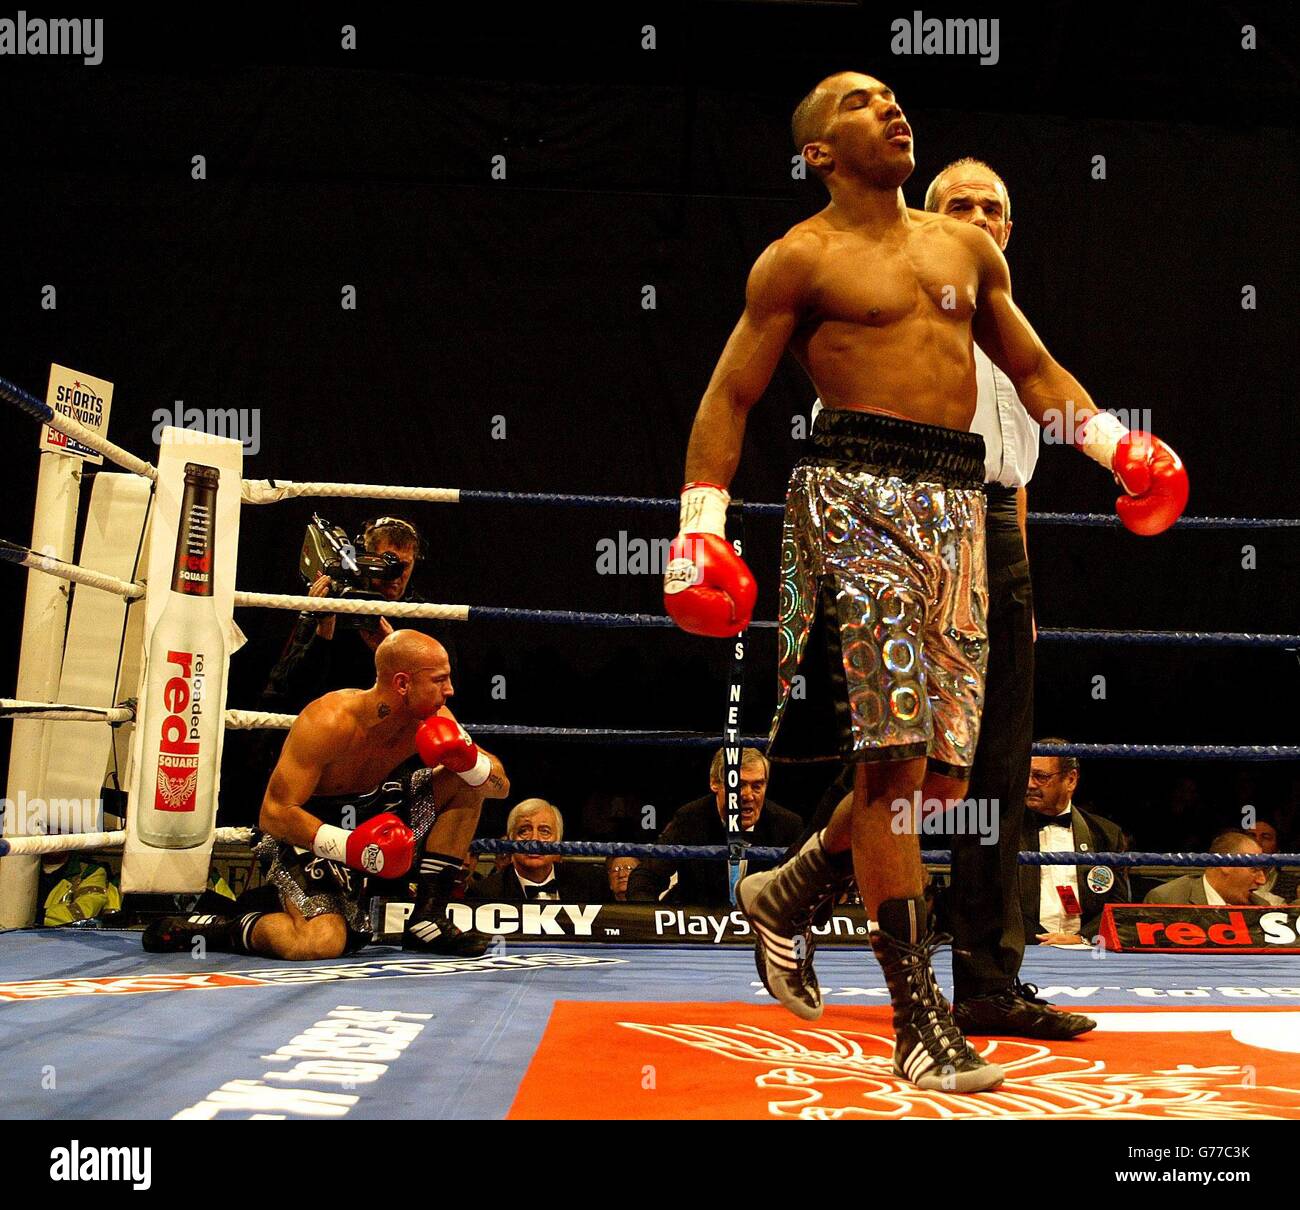 Junior Witter (right) goes to a neutral corner, as challenger Guiseppe Lauri (left), recovers after a 1st round knockdown. Witter beat Lauri in the 2nd round, stoped by referee Micky Vann, during Official eliminator contest for the WBO Light-Welterweight Championship of the World, at Storm Arena in Derby. Stock Photo